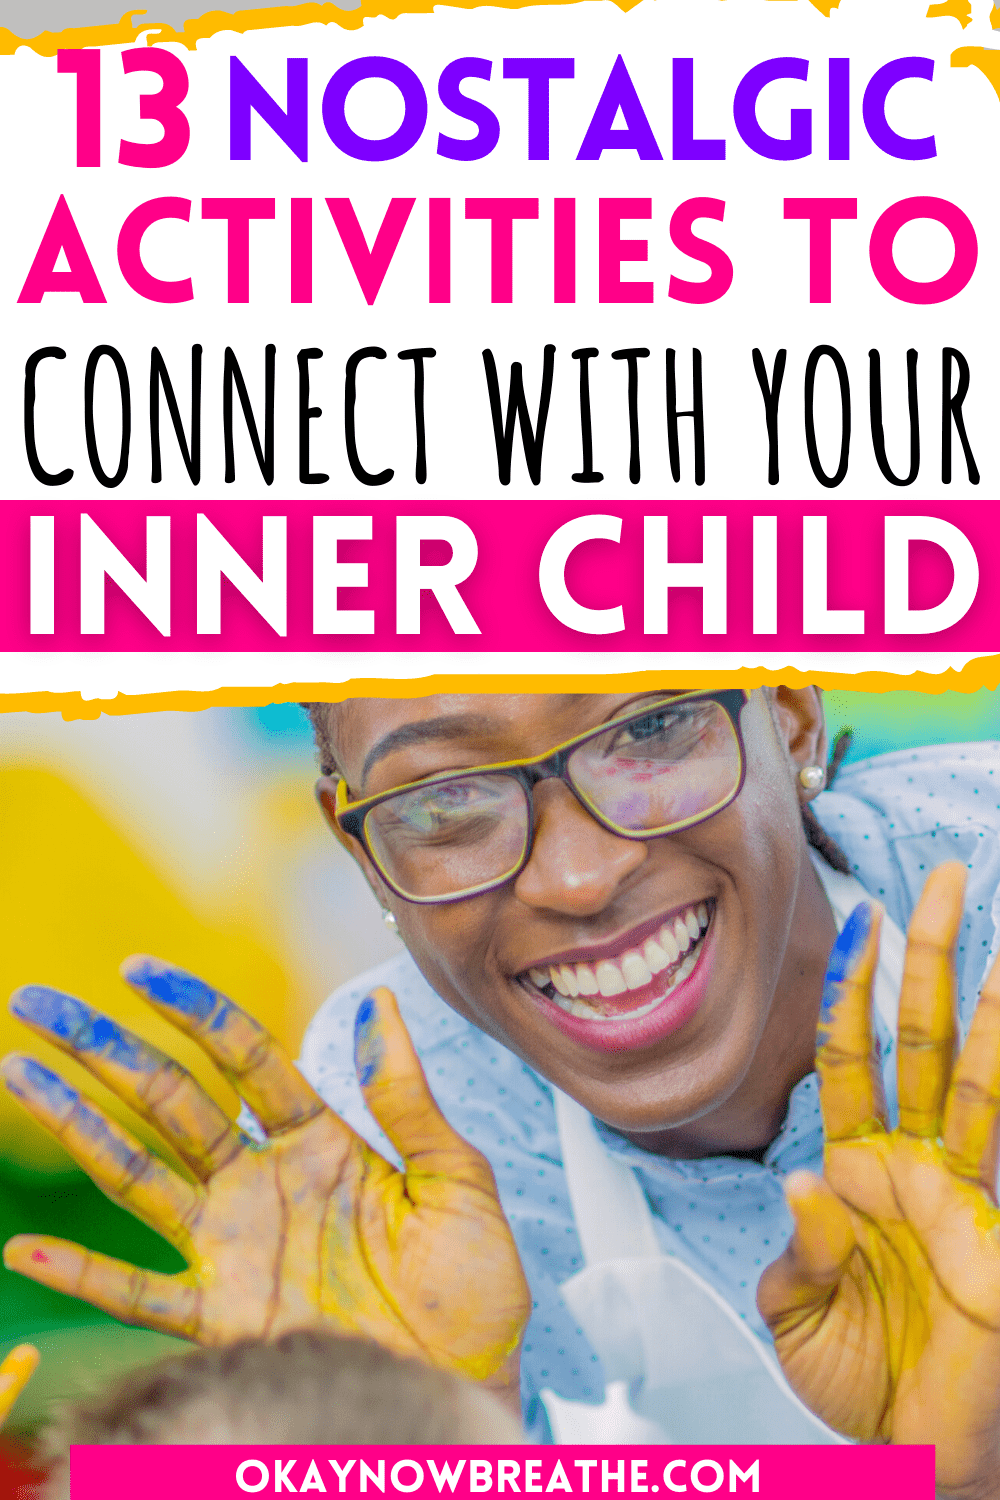 A Black woman with glasses is smiling at the camera with both palms out and facing the camera. She has yellow and blue finger paint on her palms. Text overlay says, "13 nostalgic activities to connect with your inner child - okaynowbreathe.com"